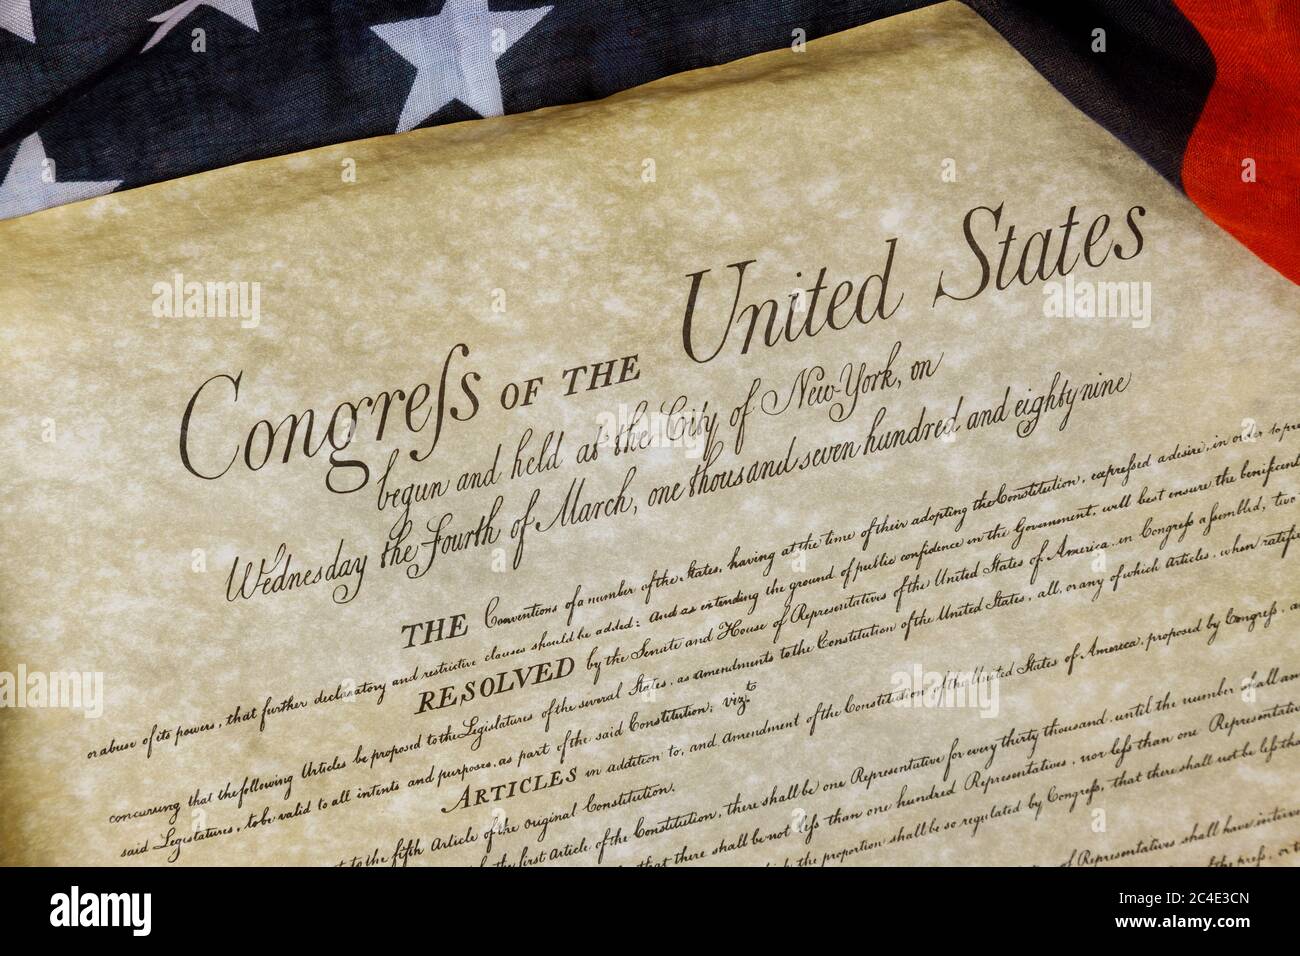 Constitution of the United States of America first of the National Archives in the Constitutional Convention in 1787. Stock Photo